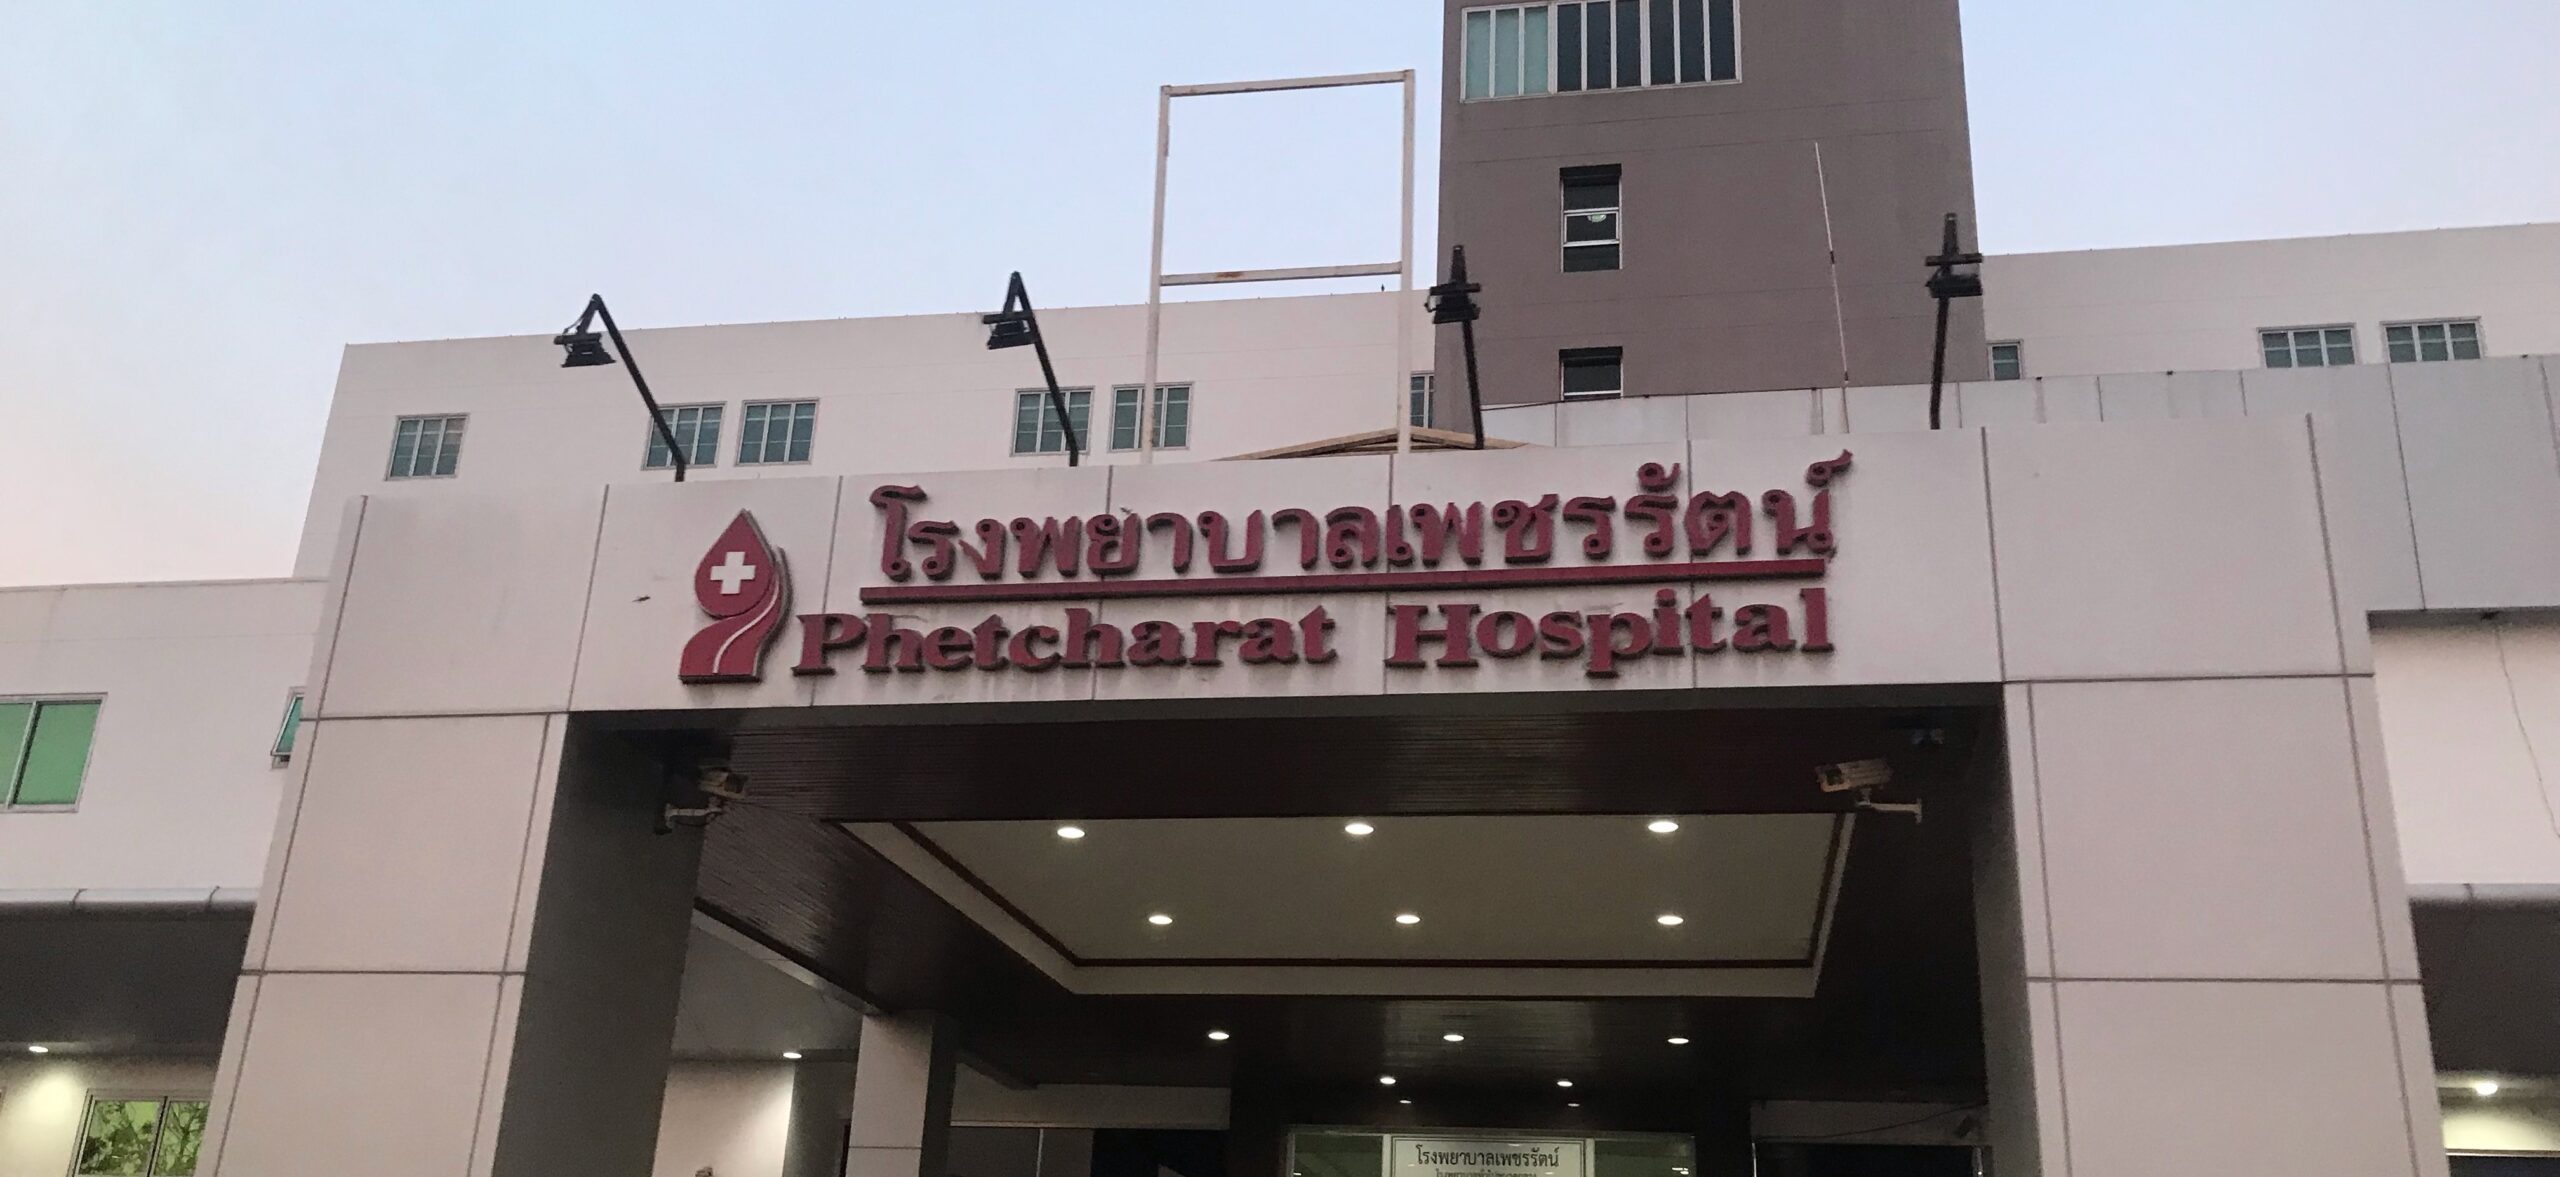 Hospital in Thailand